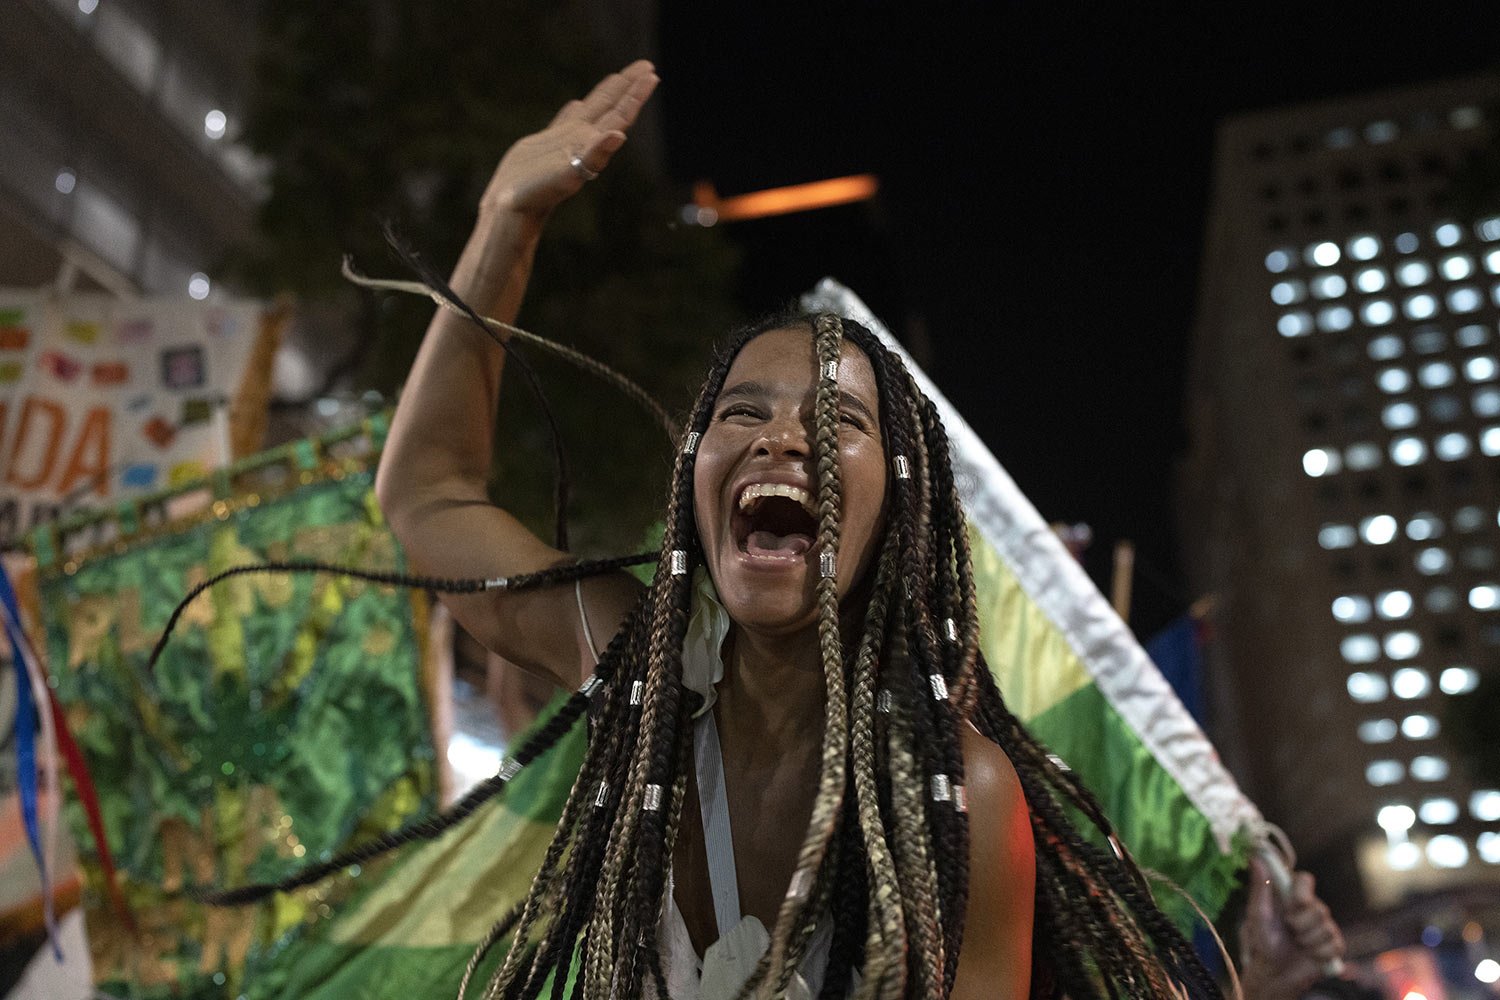  A Carnival reveler dances at a street party, or “bloco,” as part of a protest against Carnival restrictions by city officials in Rio de Janeiro, Brazil, April 13, 2022. City Hall banned Carnival street parties  due to the pandemic. (AP Photo/Silvia 